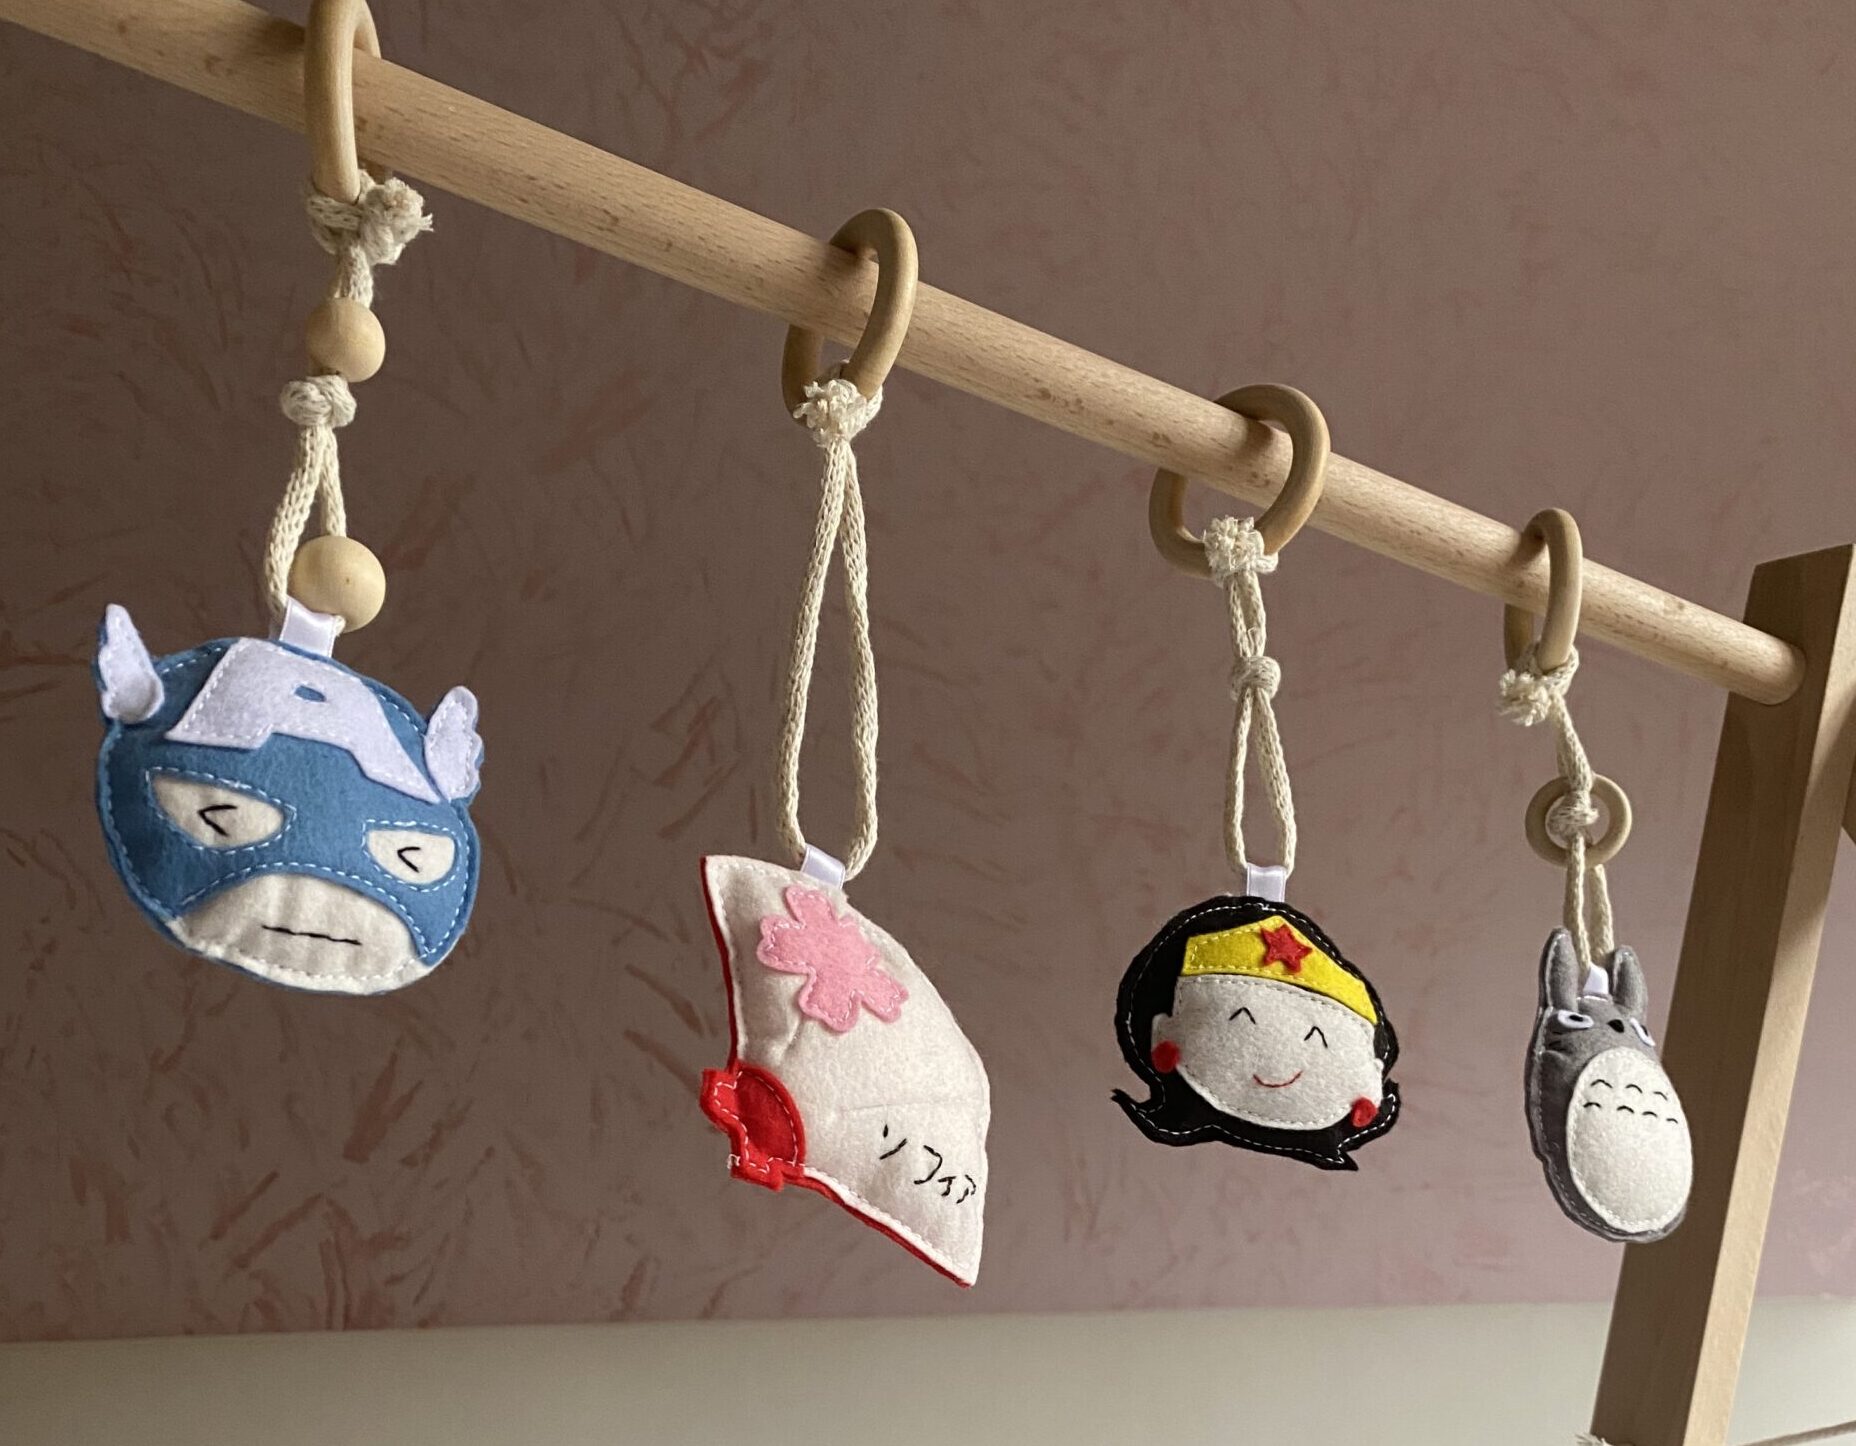 Baby gym charms are now available for purchase